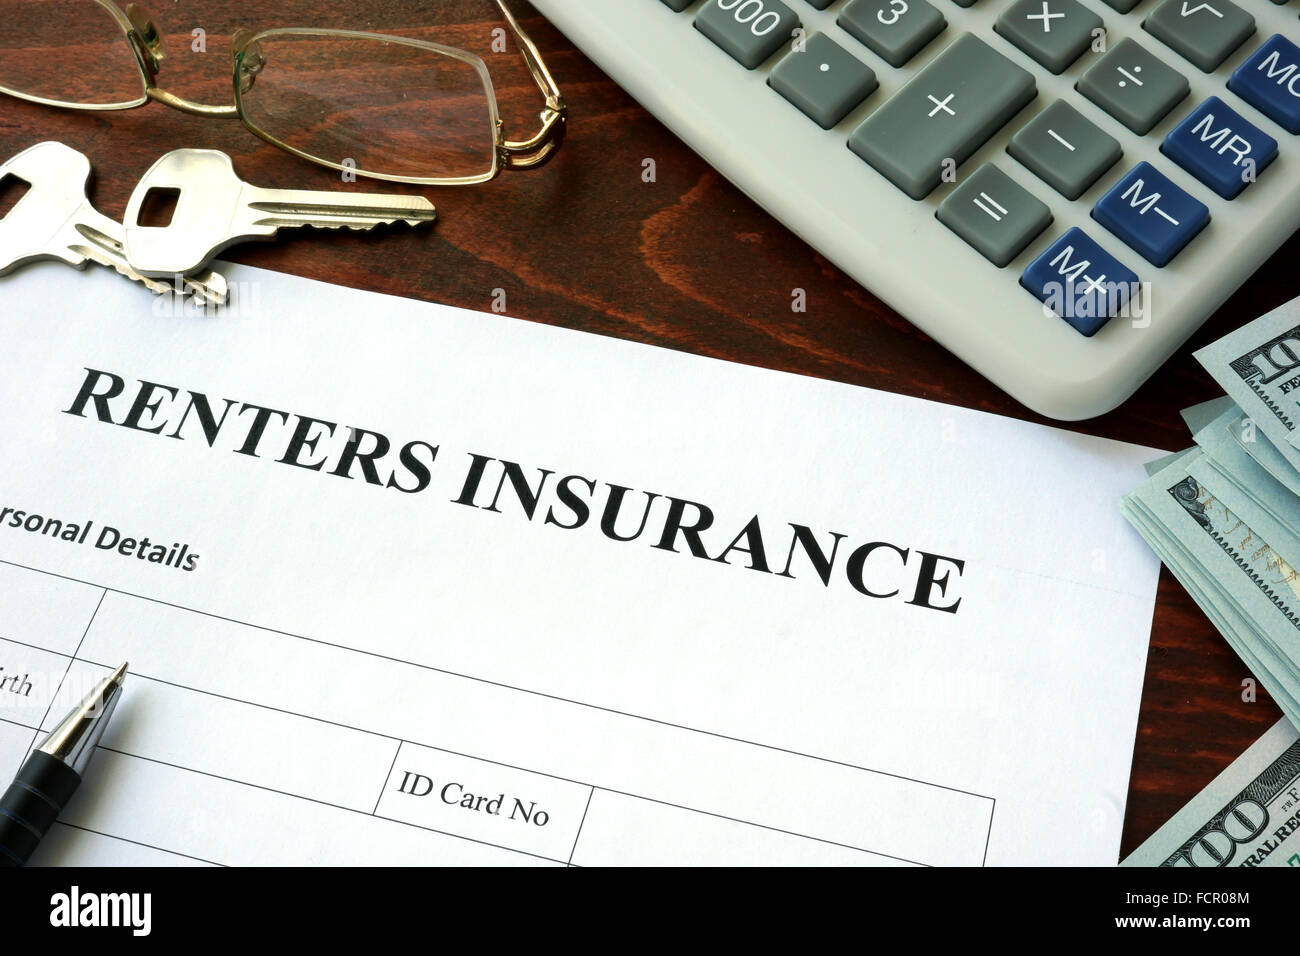 Renters insurance form and dollars on the table. Stock Photo